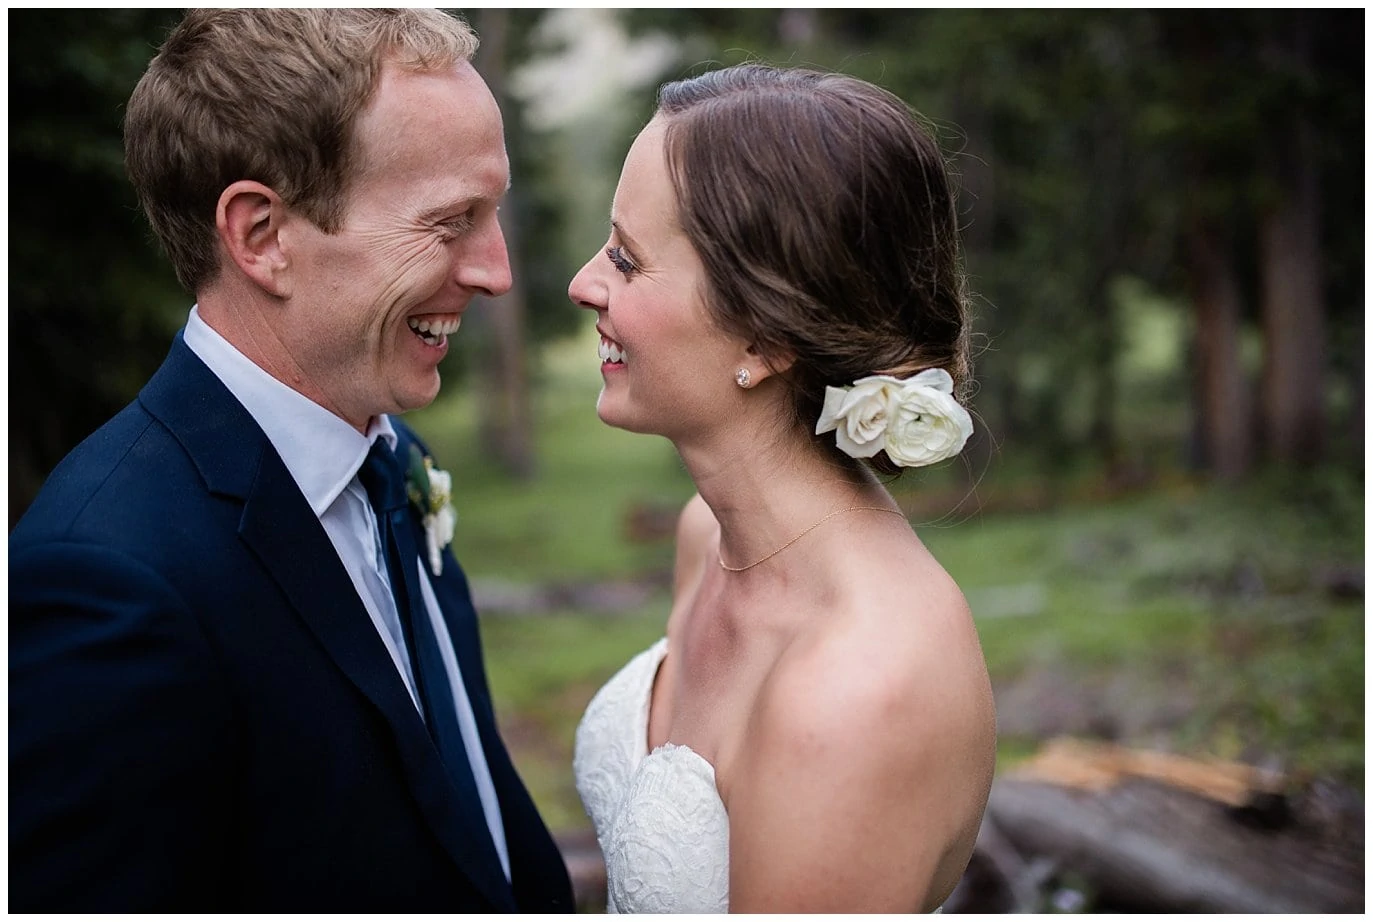 white flowers in bride's hair at Arapahoe Basin Black Mountain Lodge Wedding by Colorado Wedding Photographer Jennie Crate